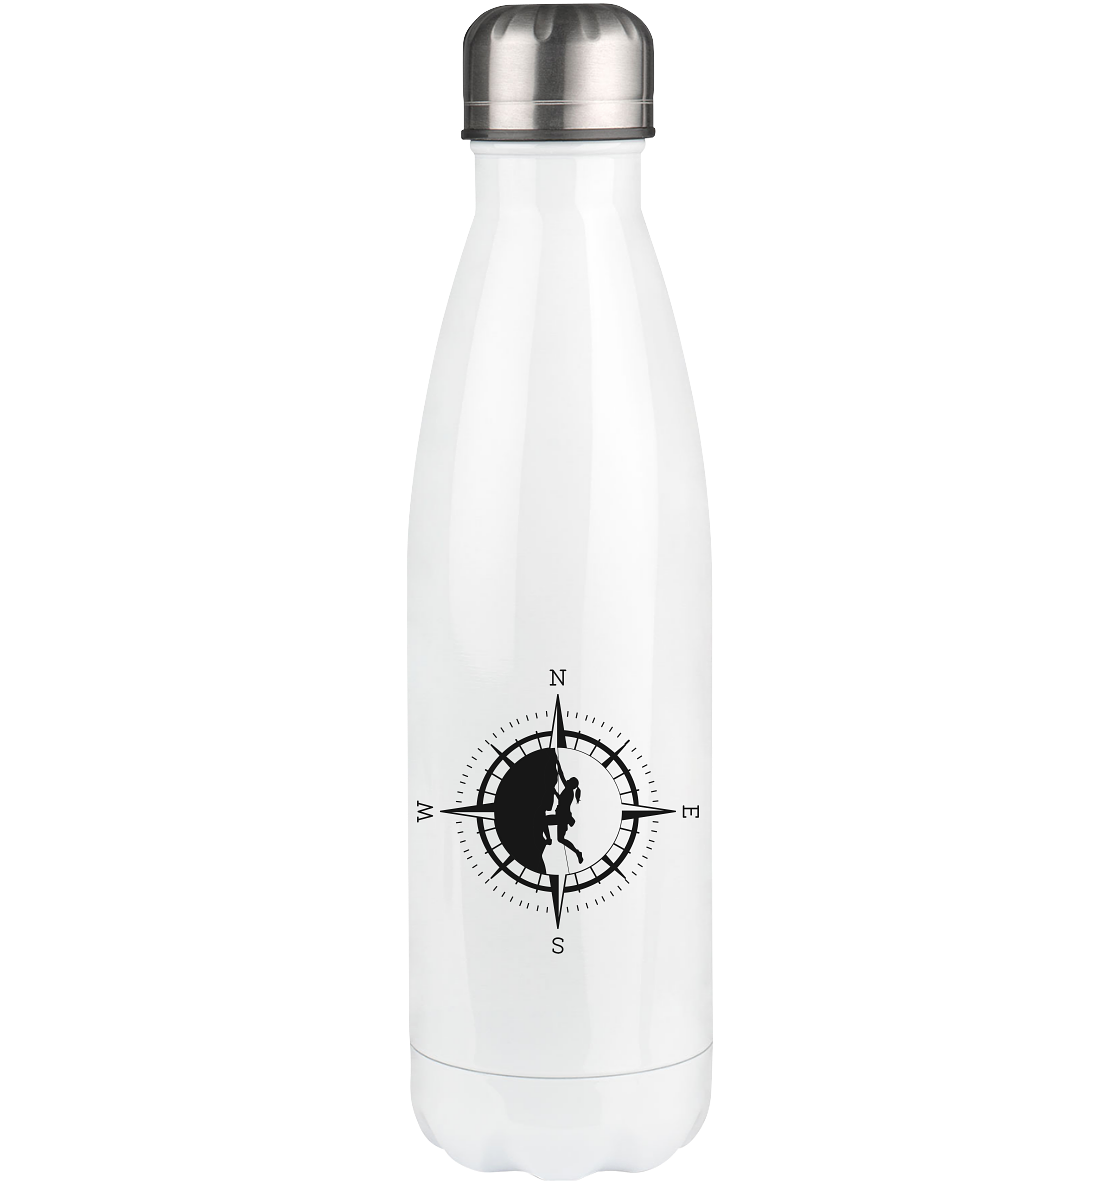 Compass and Climbing - Edelstahl Thermosflasche klettern 500ml